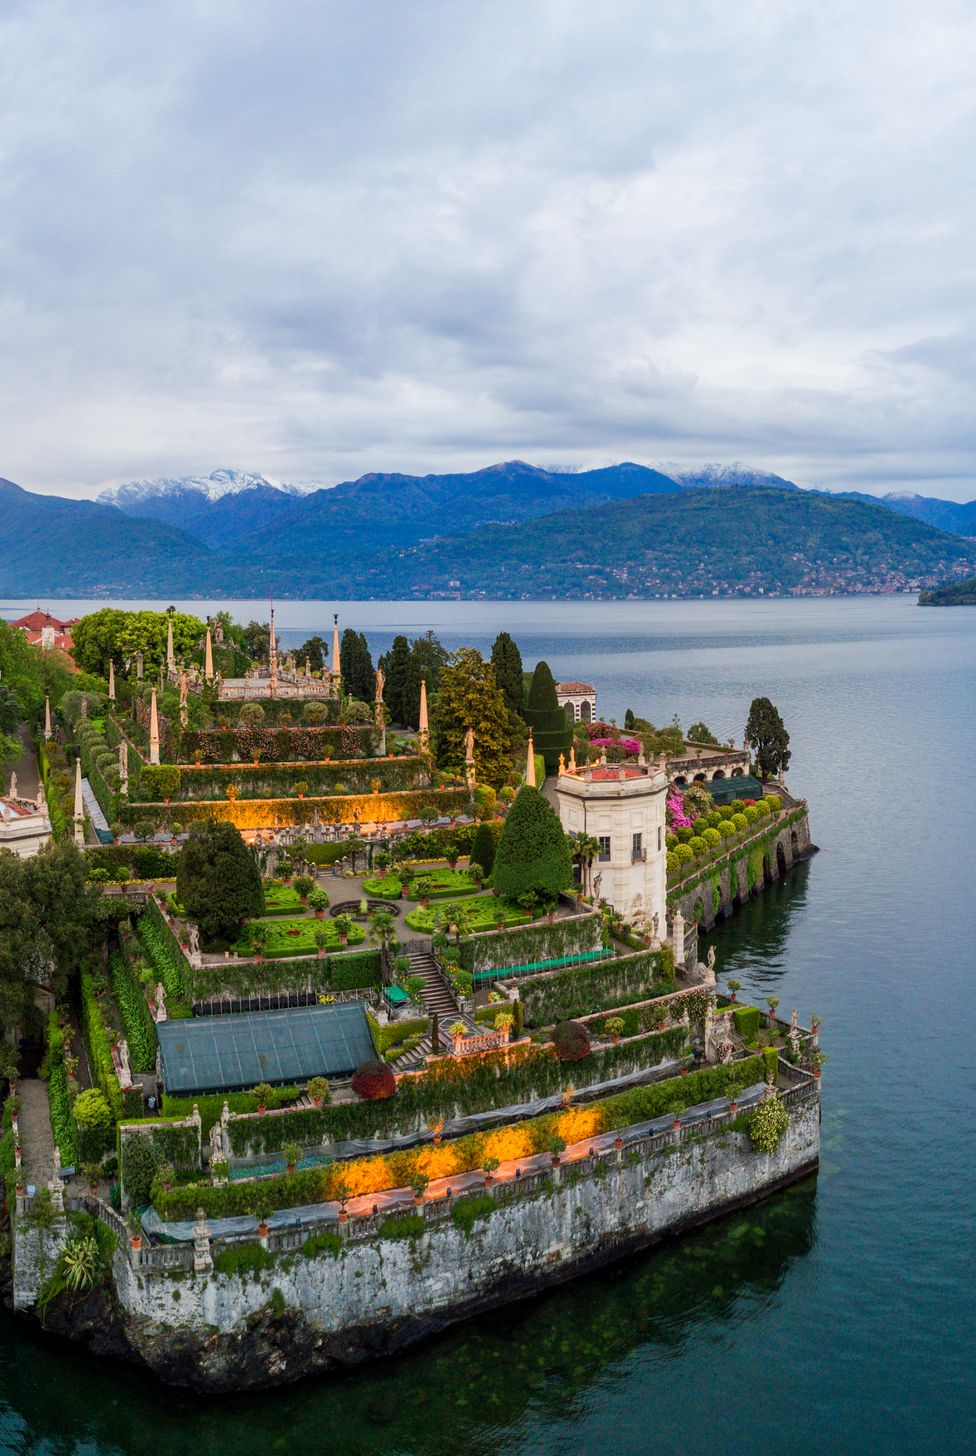 aerial view of the baroque gardens of isola bella, an island on lake maggiore